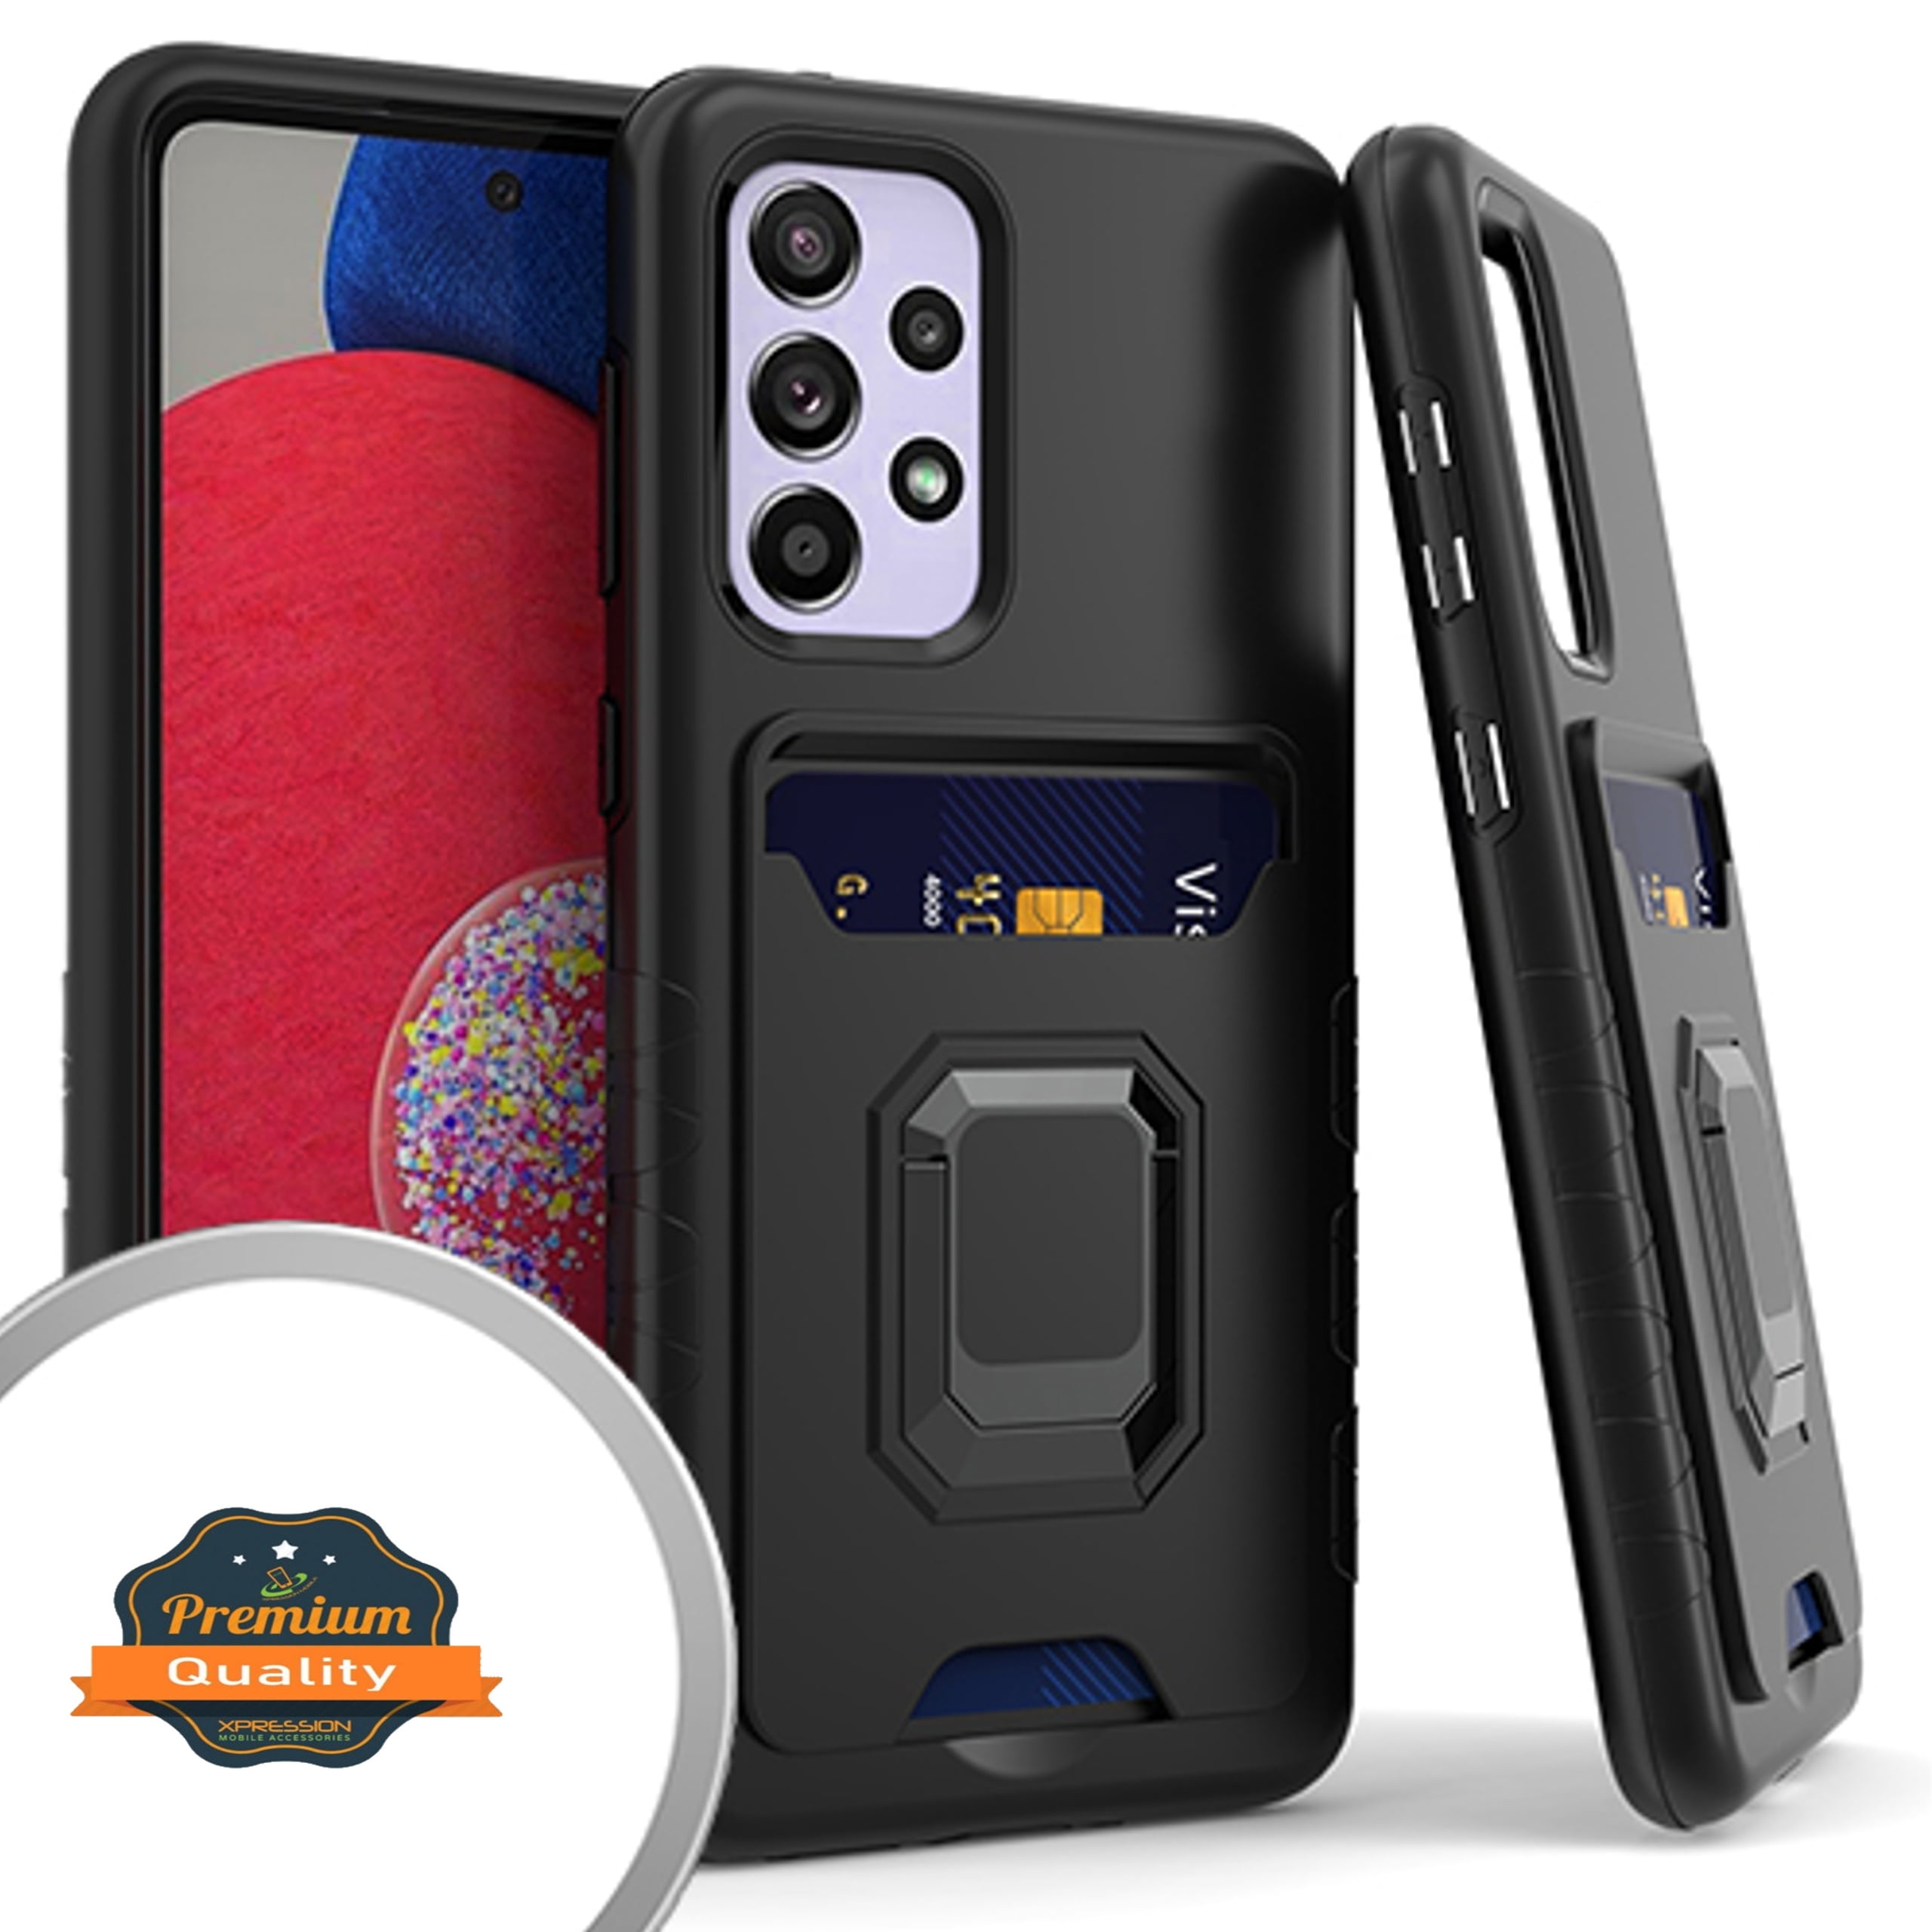 Smartphone Accessories, Holders, Cases